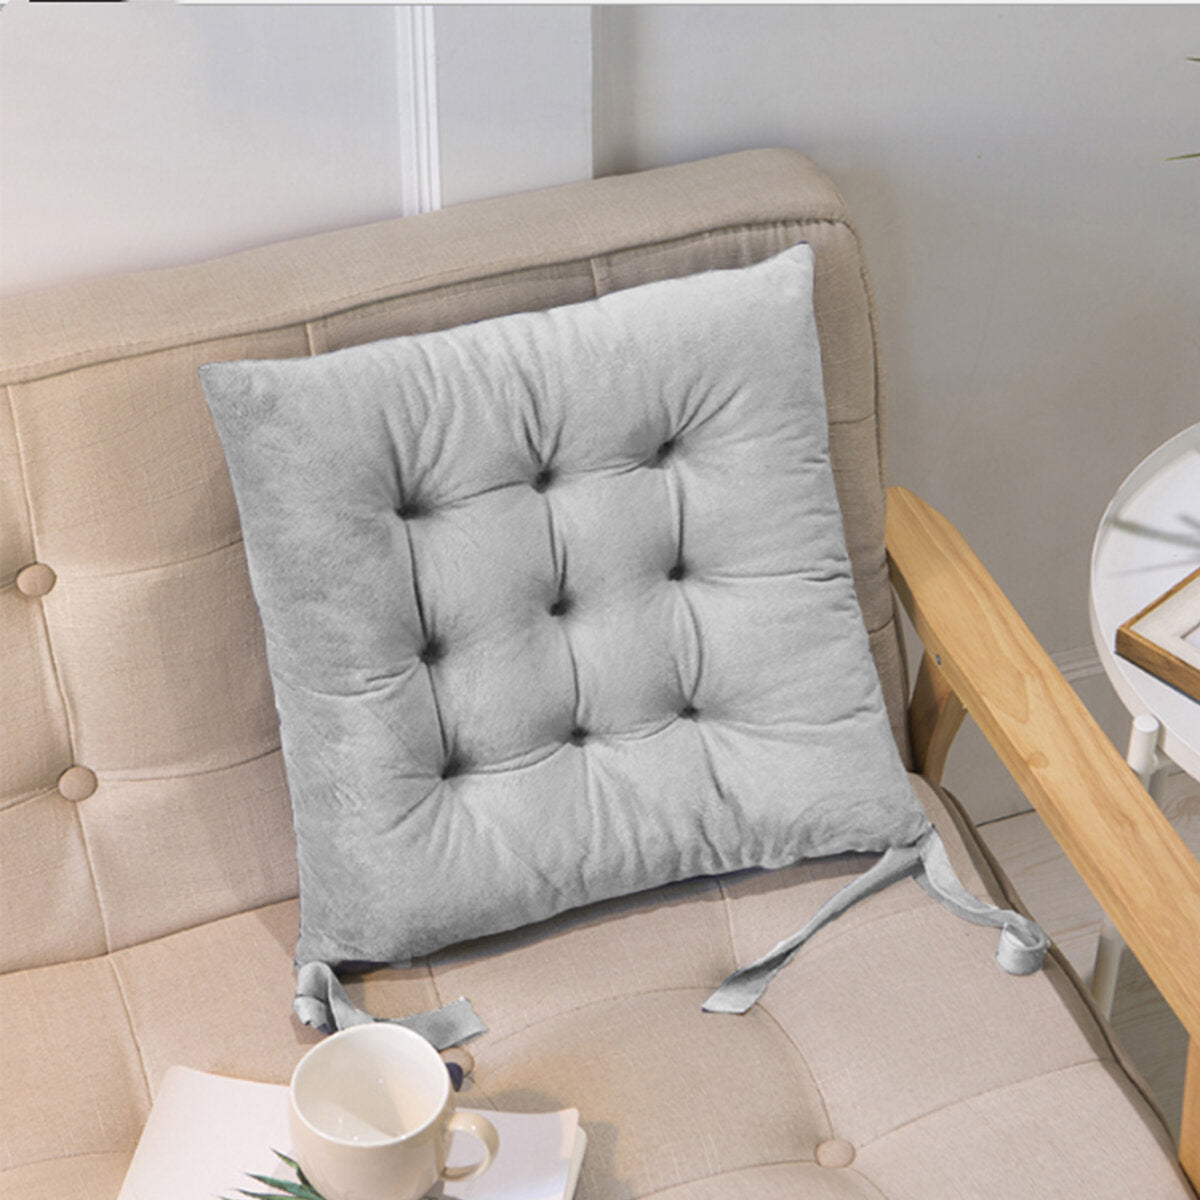 Square Thick Cushions Chair Seat Pad Dining Bedroom Garden Chair Seat Pillow for Home Décor 40*40cm